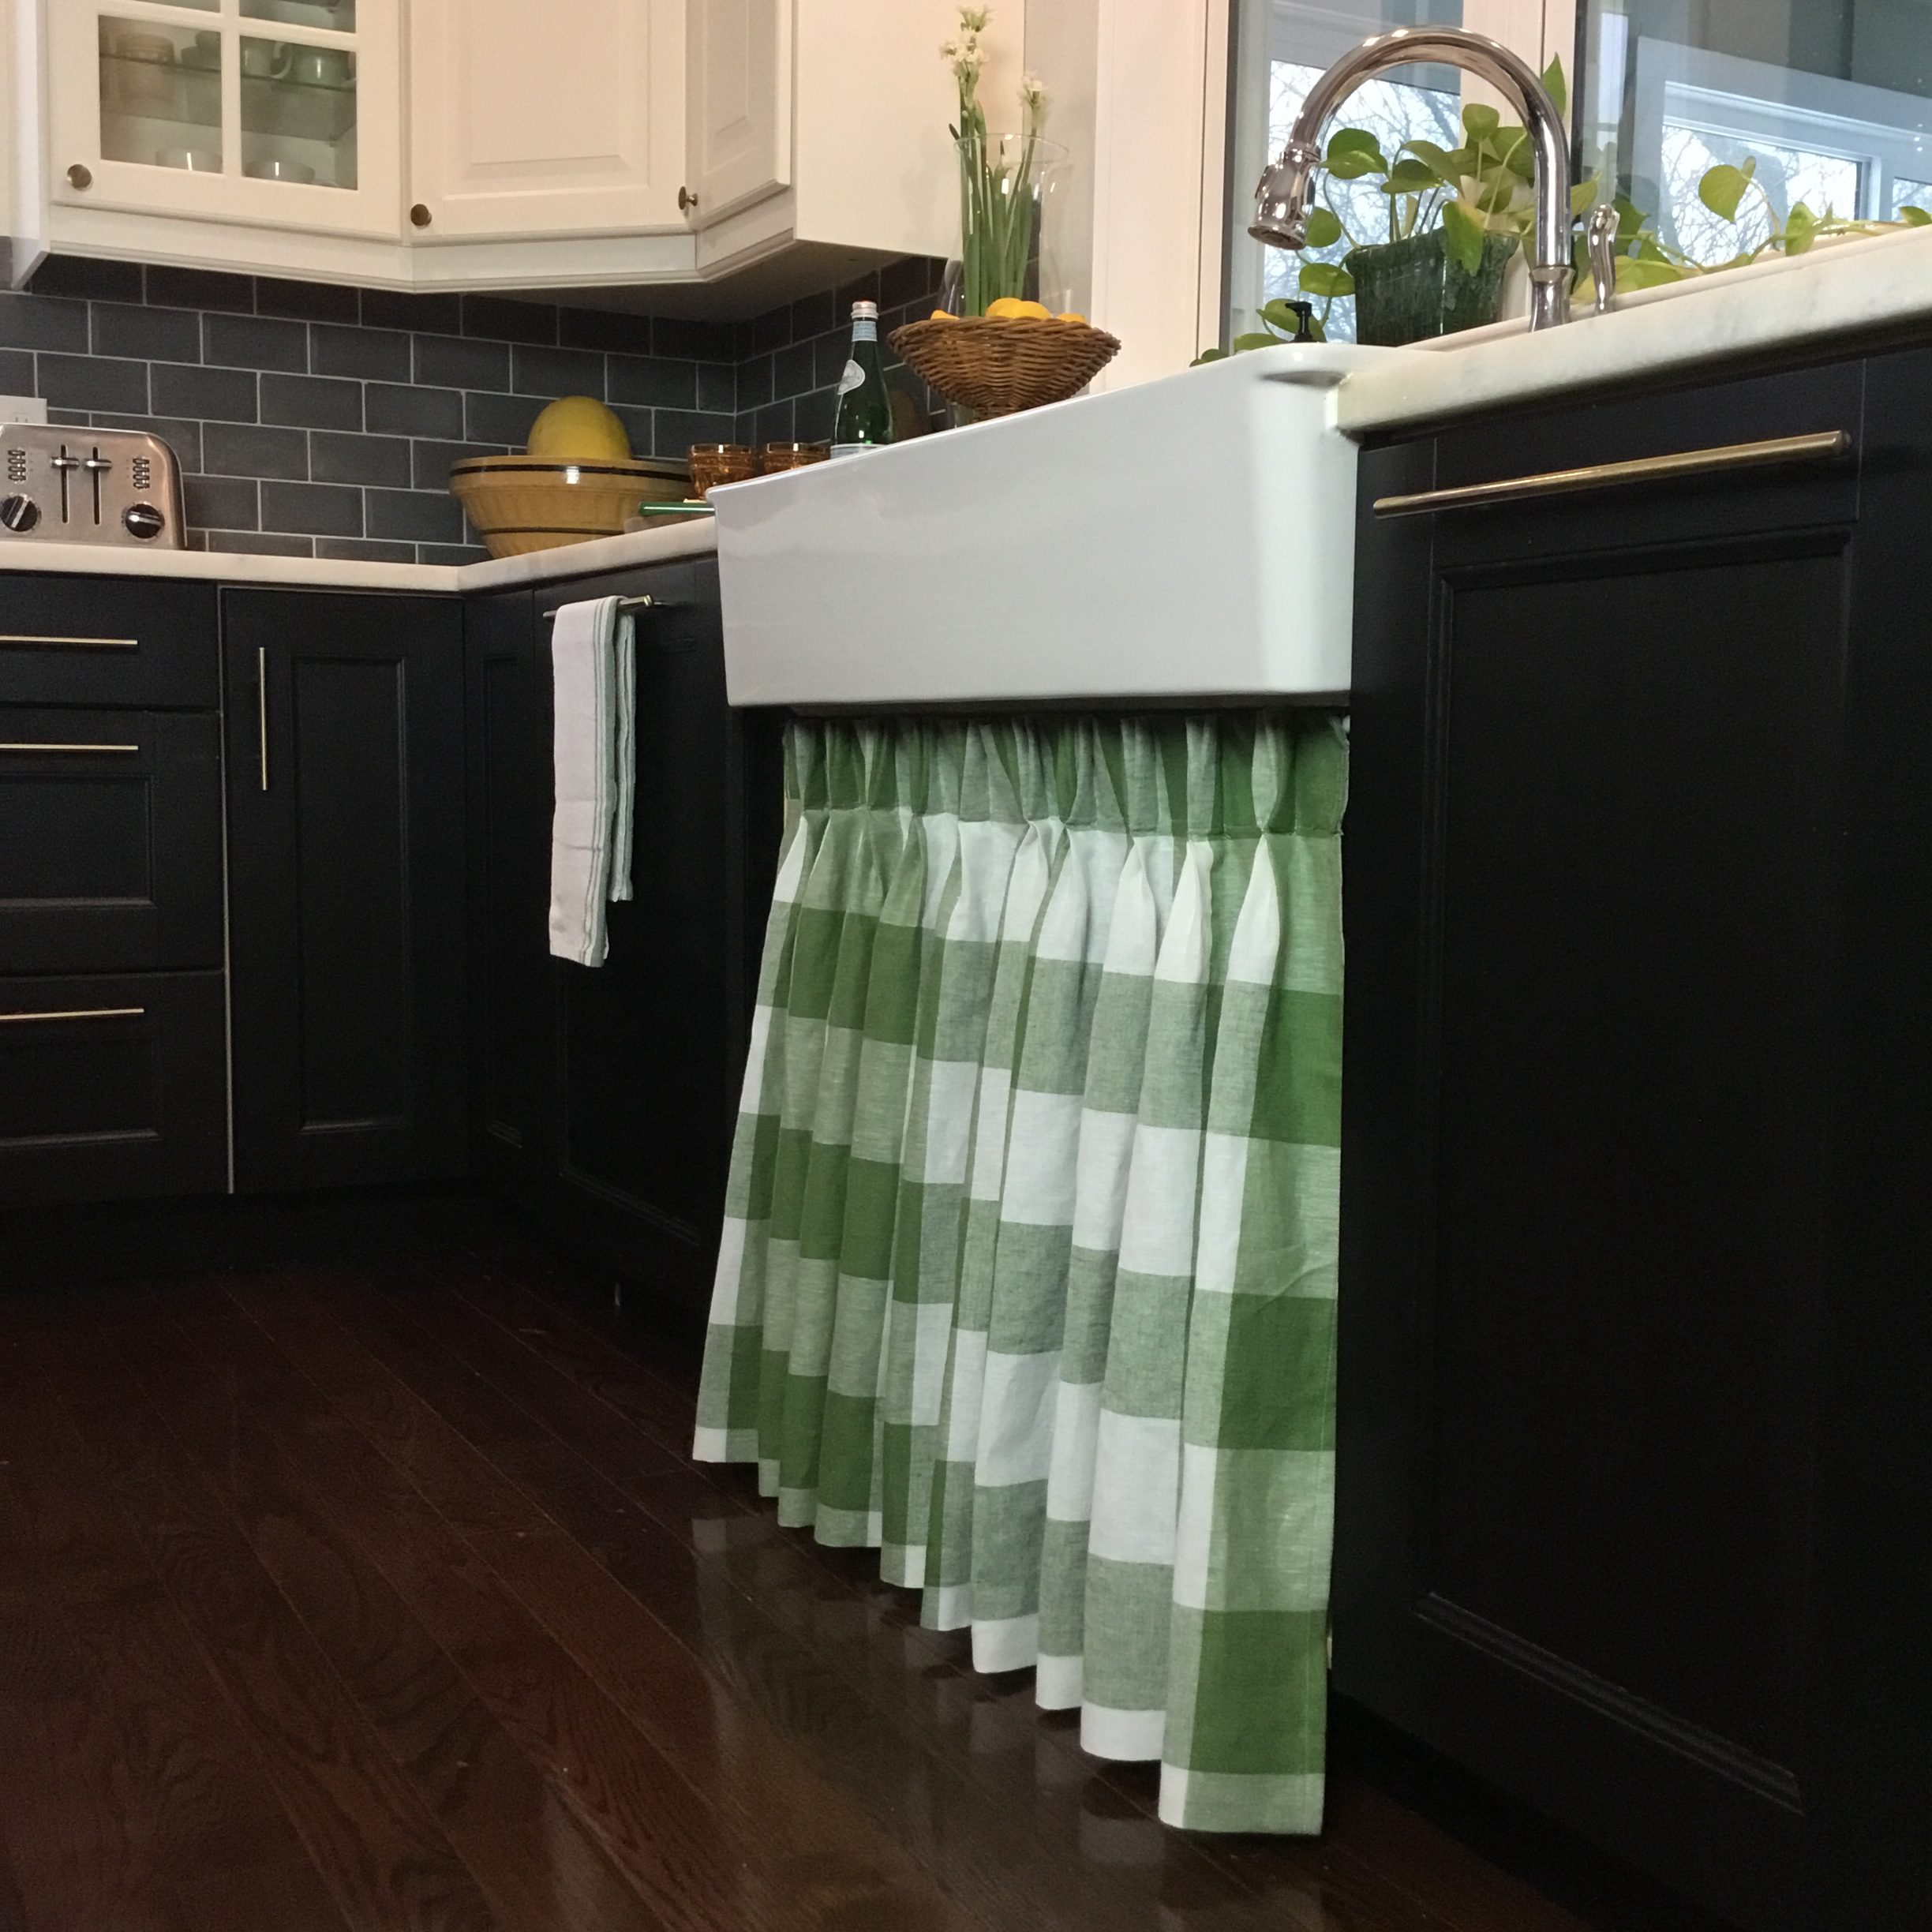 New Old Trend 10 Fresh Examples Of Sink Skirts And Cabinet Curtains